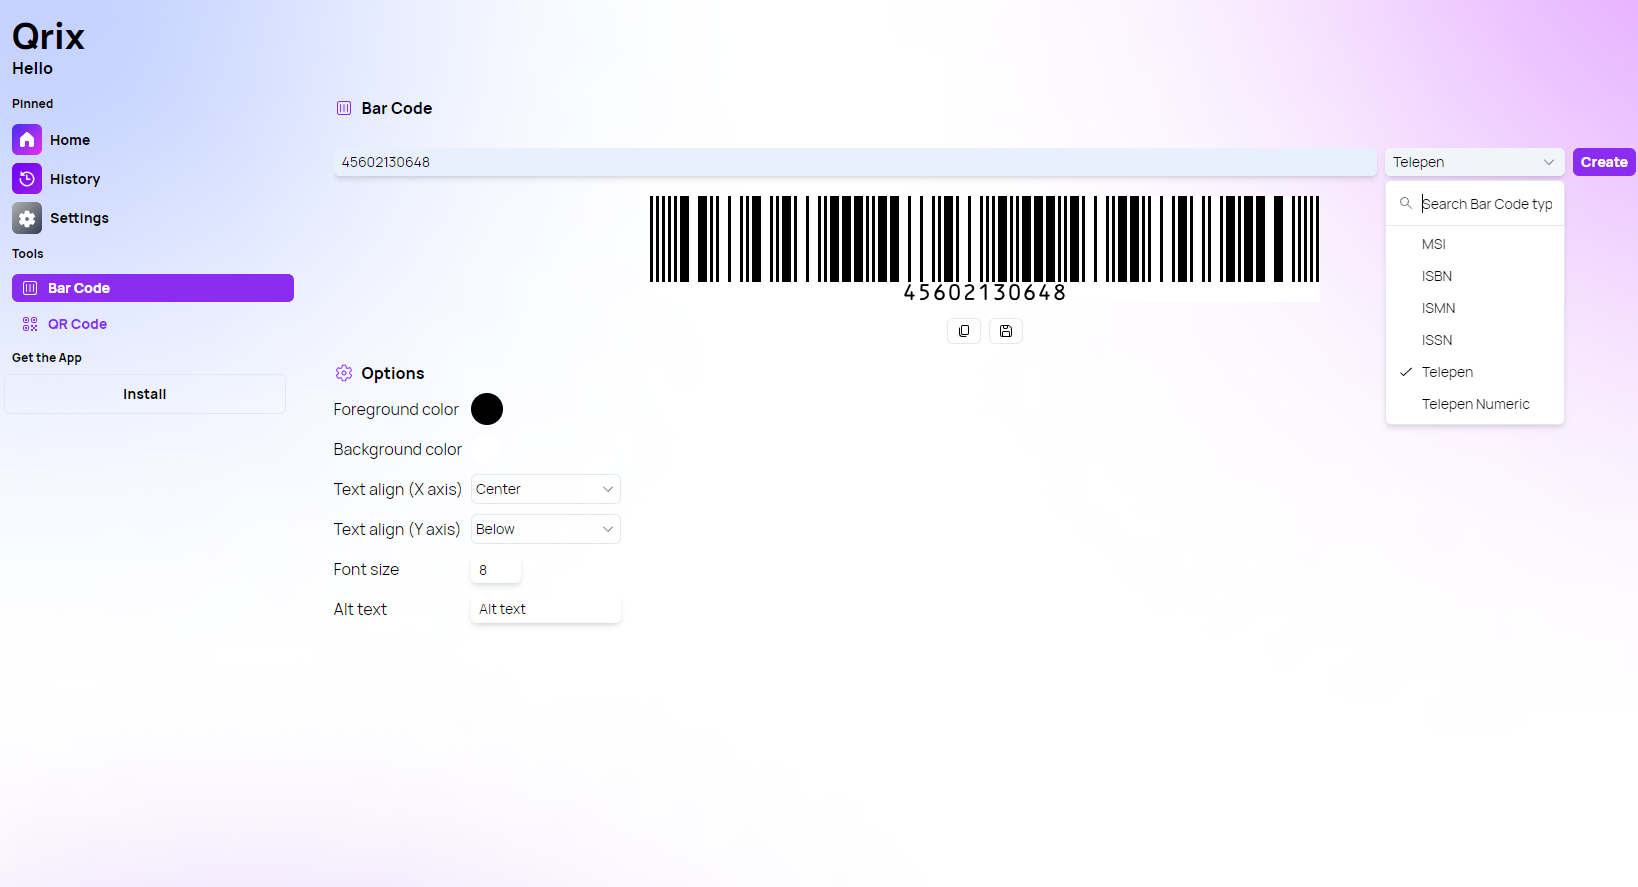 The new Telepen option in the Bar Code page